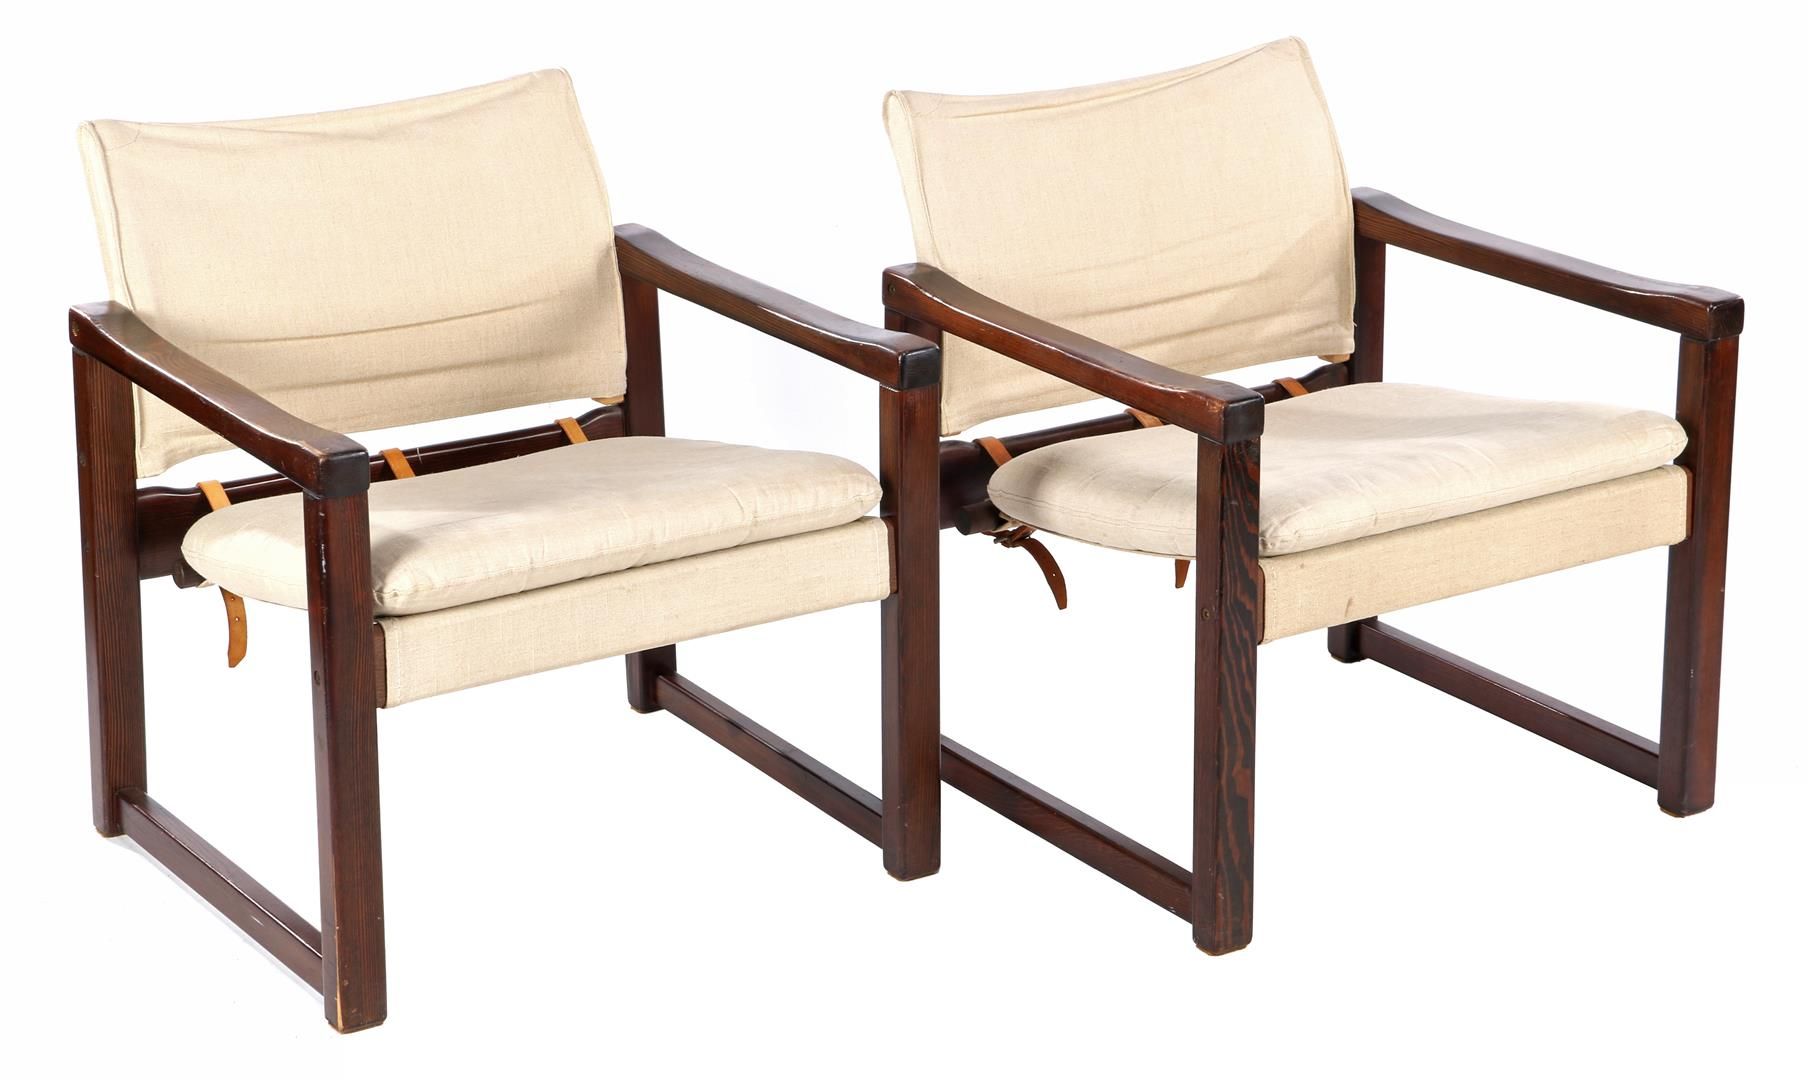 Karin Mobring Karin Möbring (1927-2005)

2 ash wood armchairs with linen cover, &hellip;